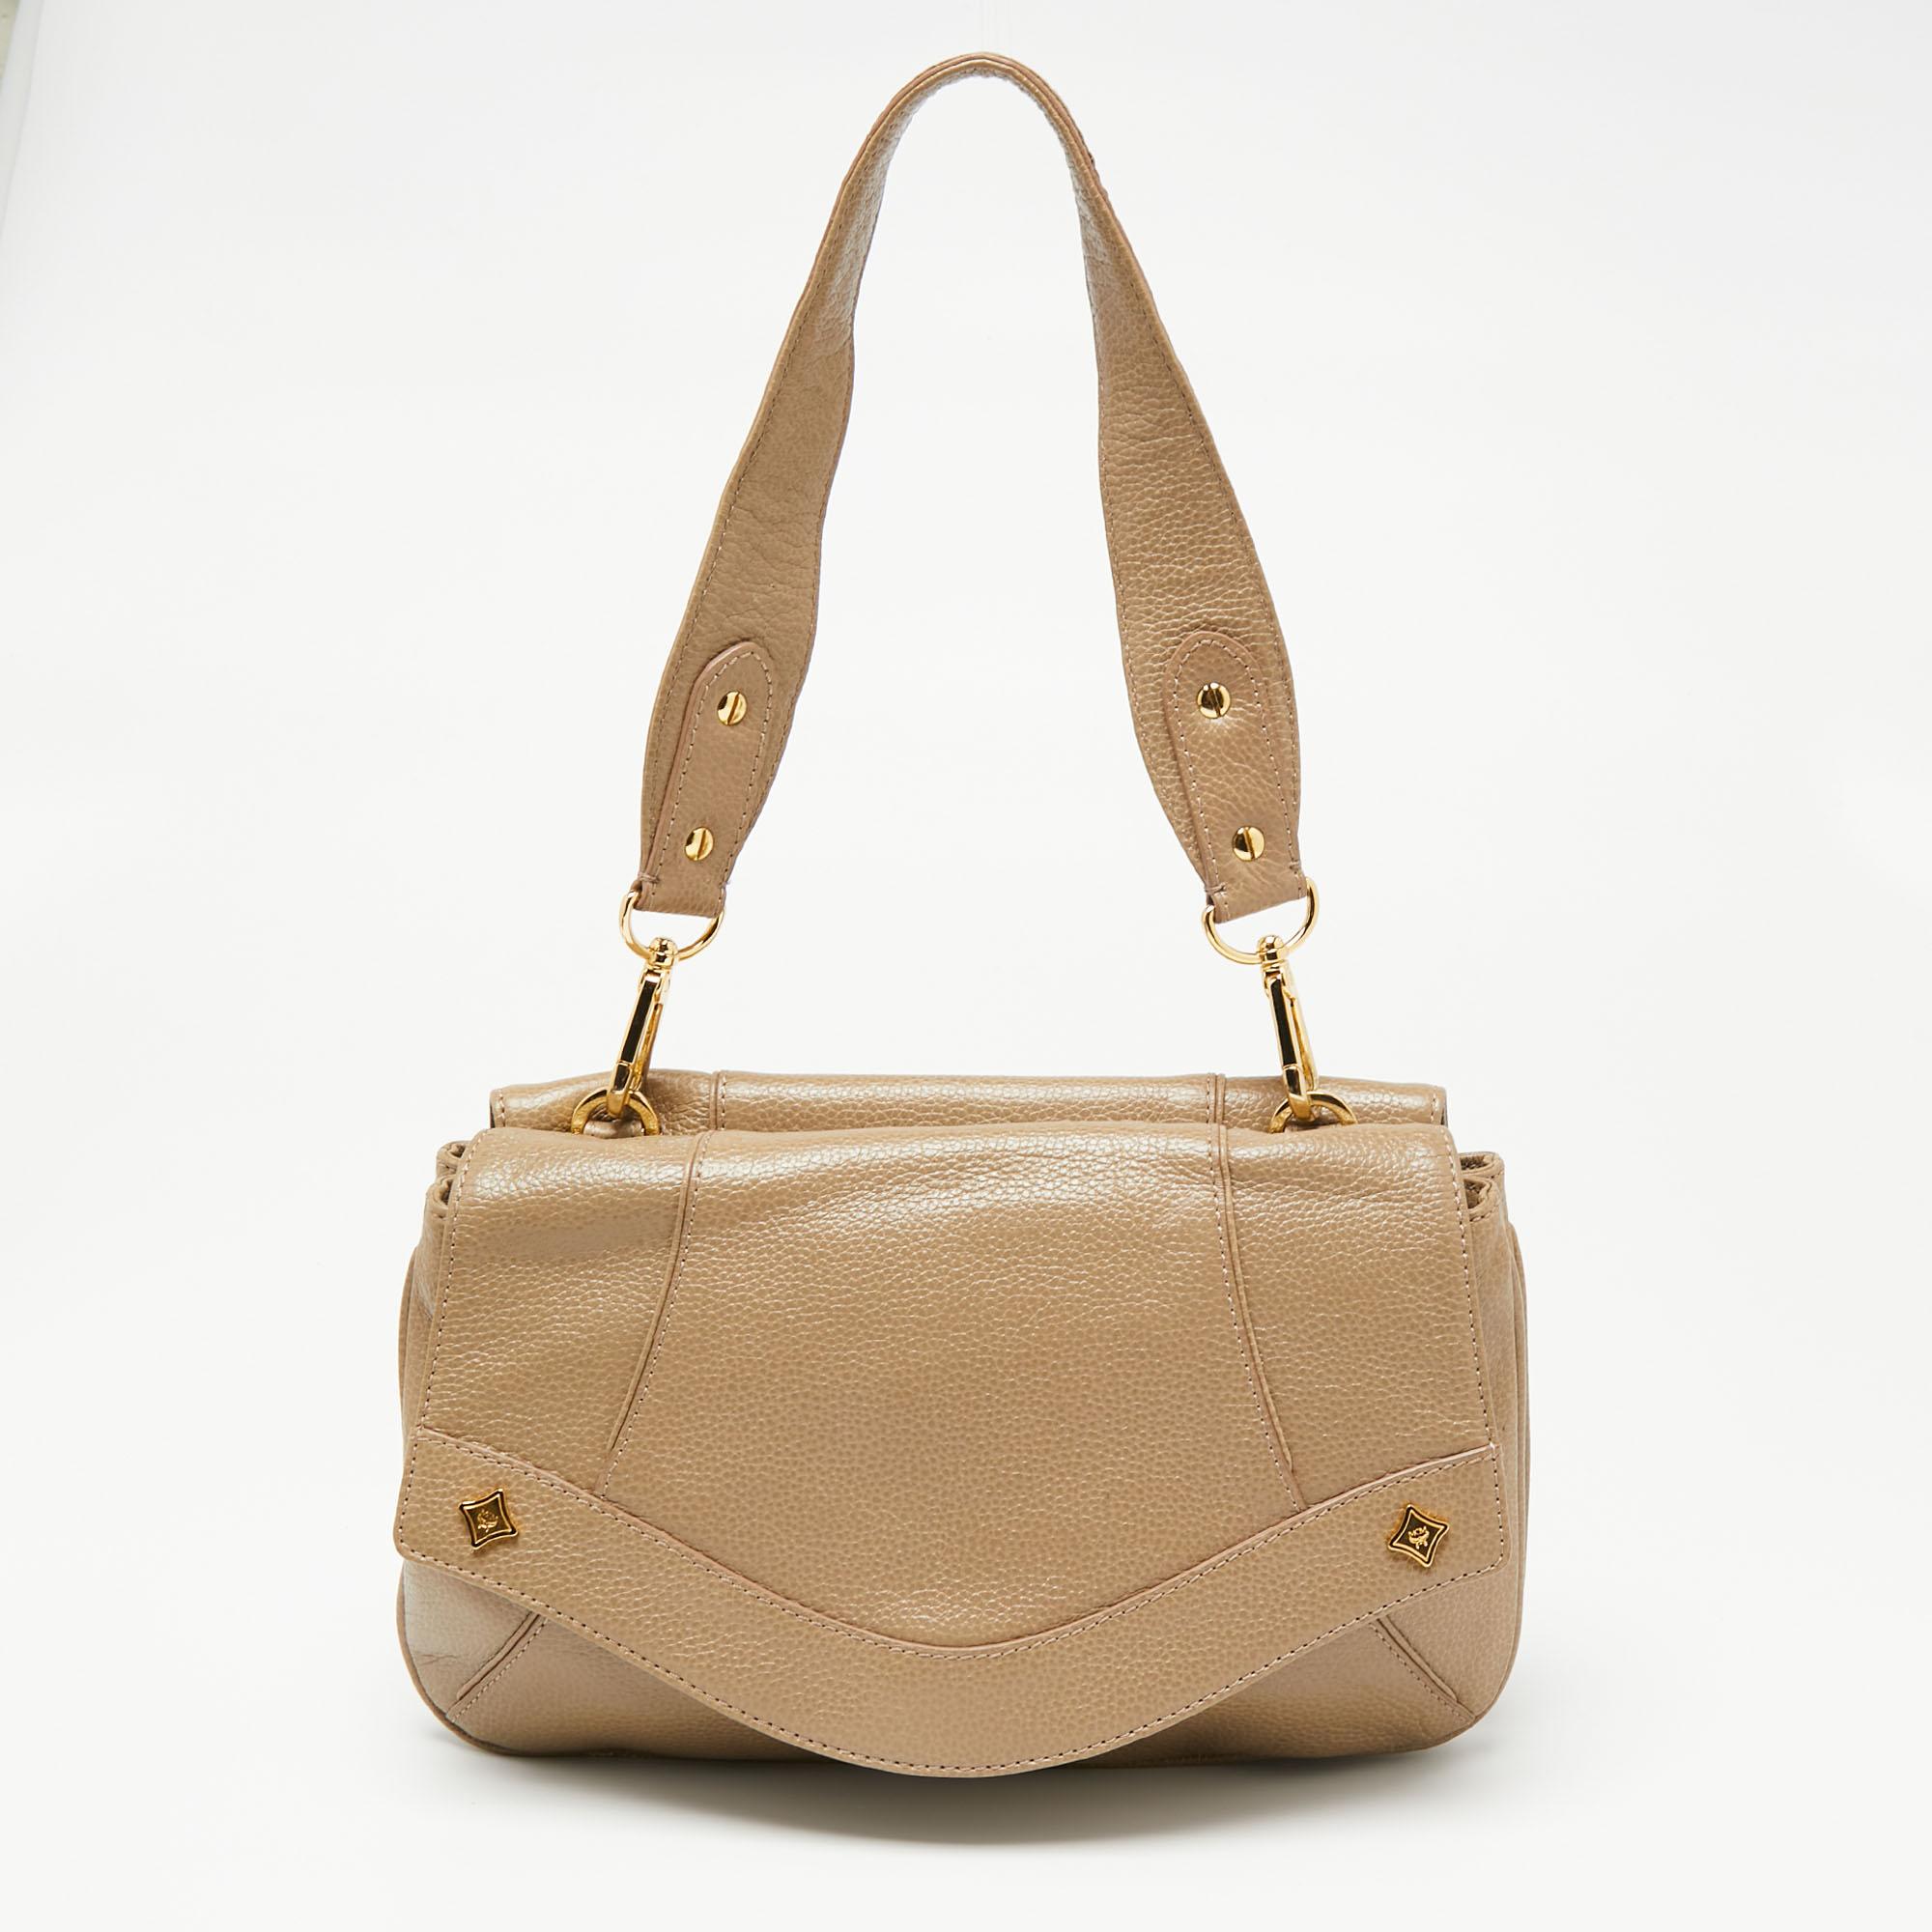 This shoulder bag from MCM is crafted from beige leather. The bag features House code studs, a double-sided flap closure, a shoulder handle, and a fabric-lined interior. This creation is easy to carry on any day.

Includes: Detachable Strap